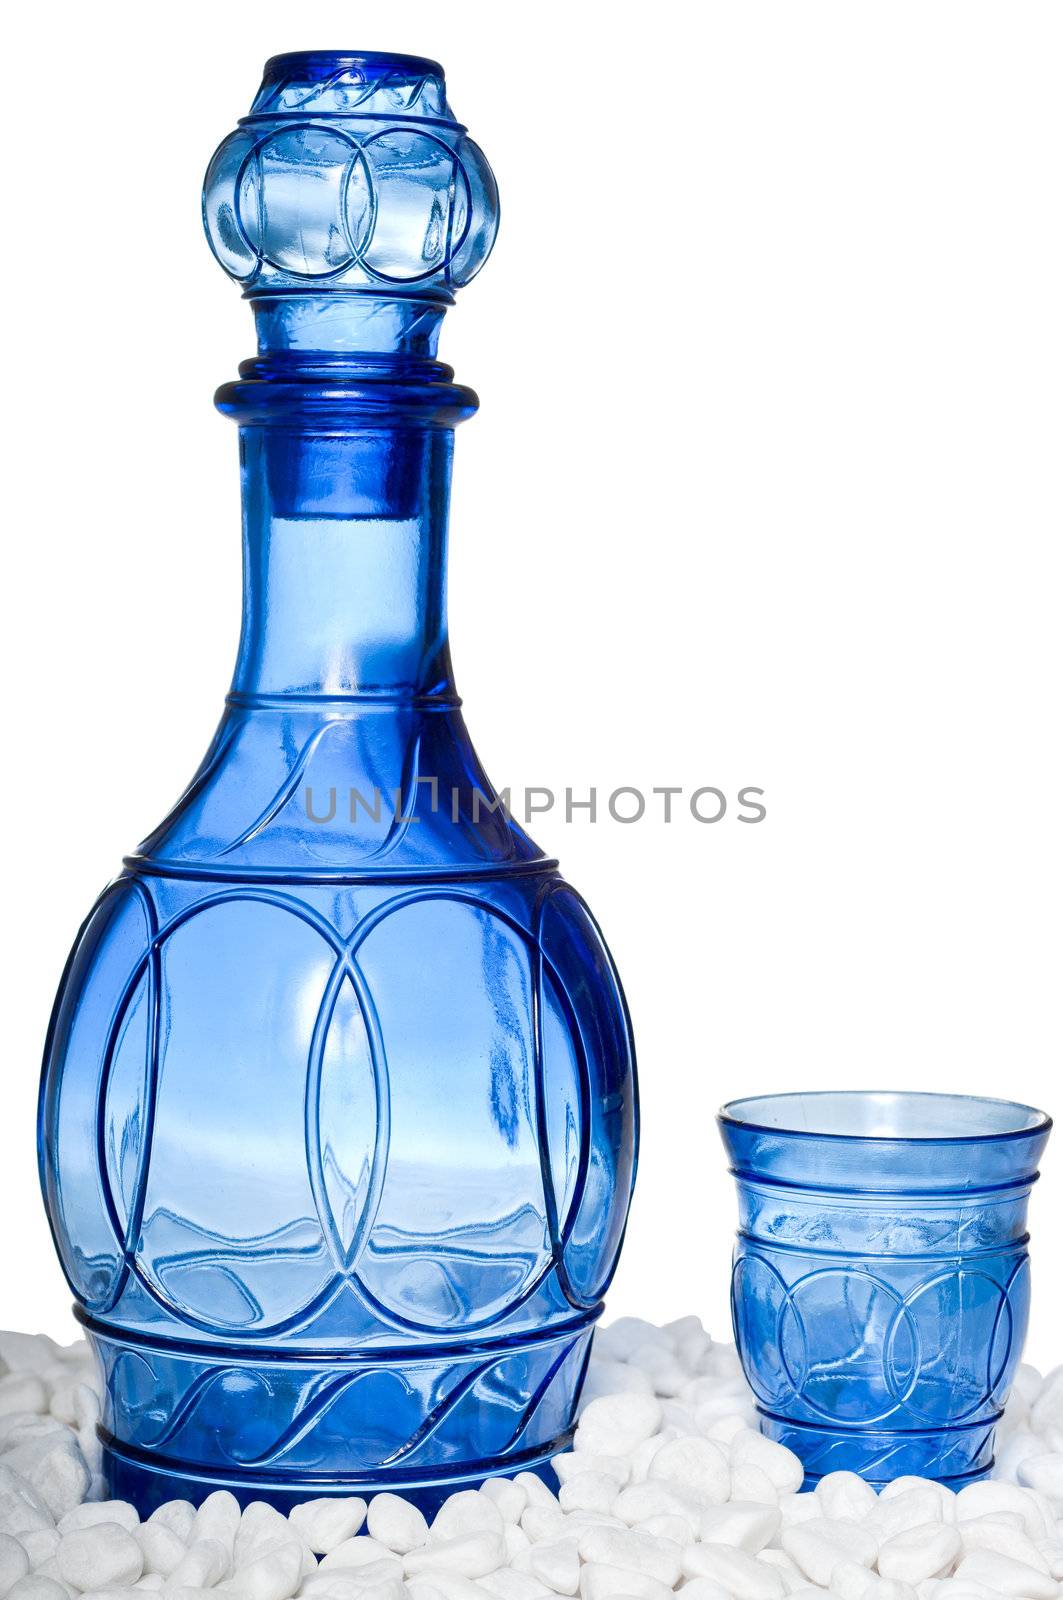 Beautiful blue bottle and tumbler on white stones, isolated on a white background